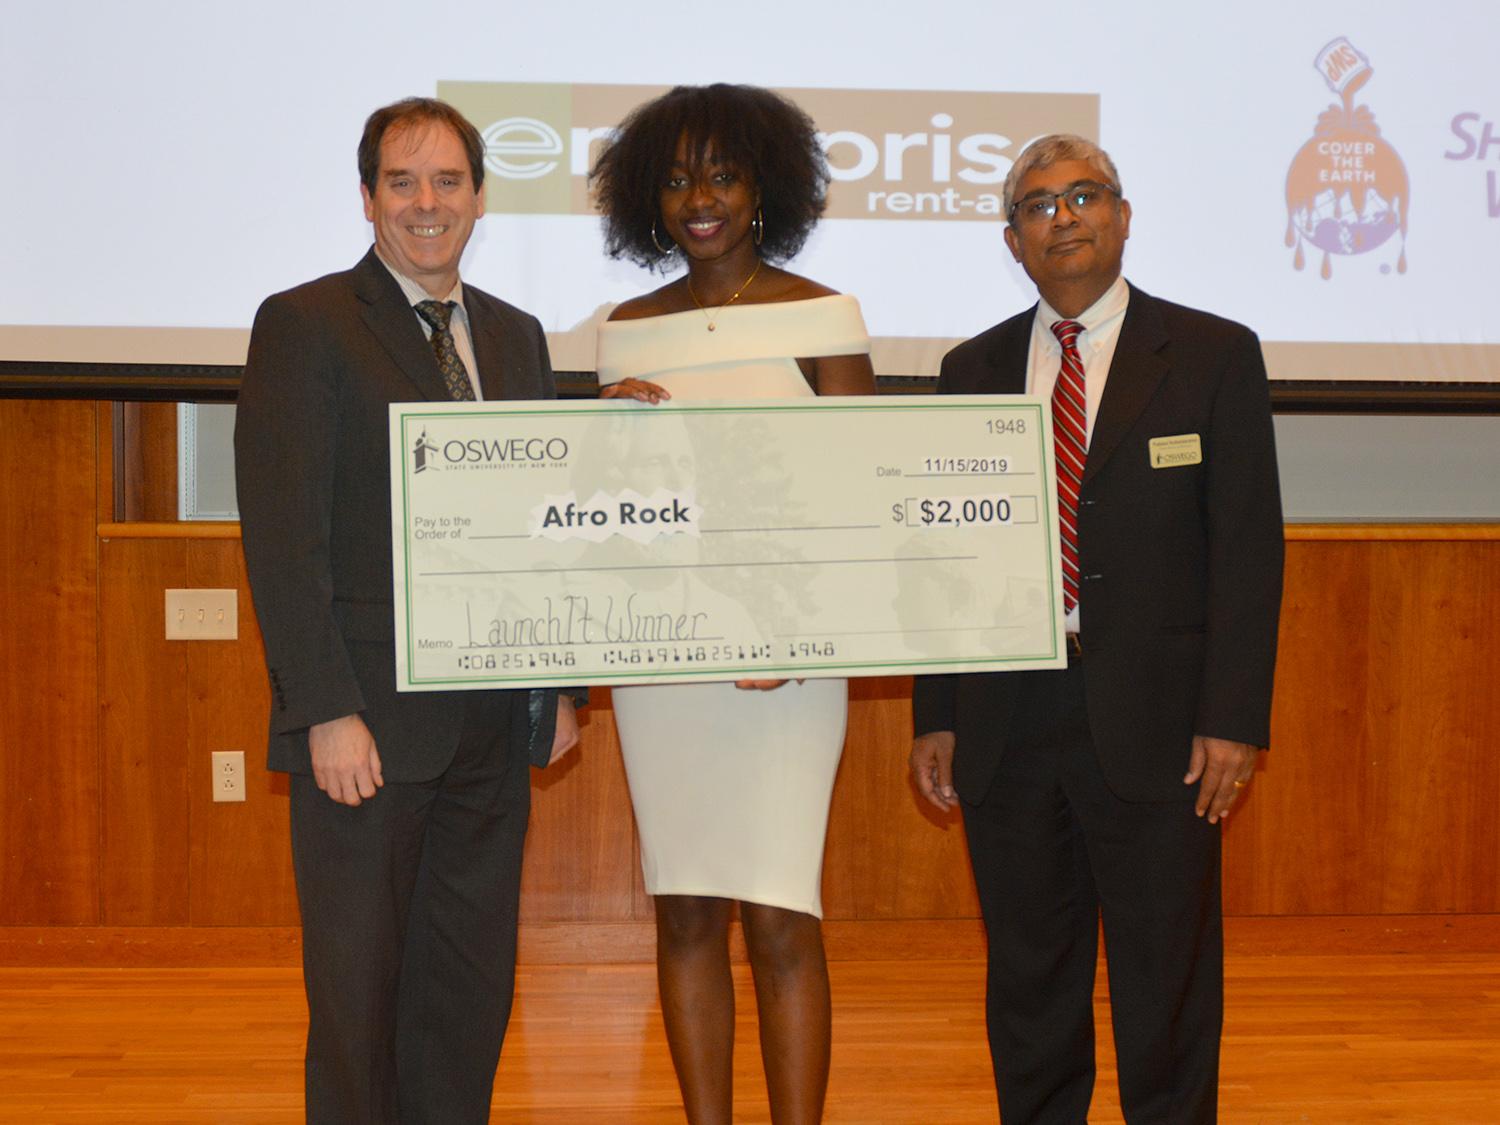 Ramatoulaye Sy, a sophomore finance major from Senegal, won the 2019 edition of SUNY Oswego’s LaunchIt student startup competition with her product AfroRock, an all-natural lotion to protect and maintain the hair and scalp